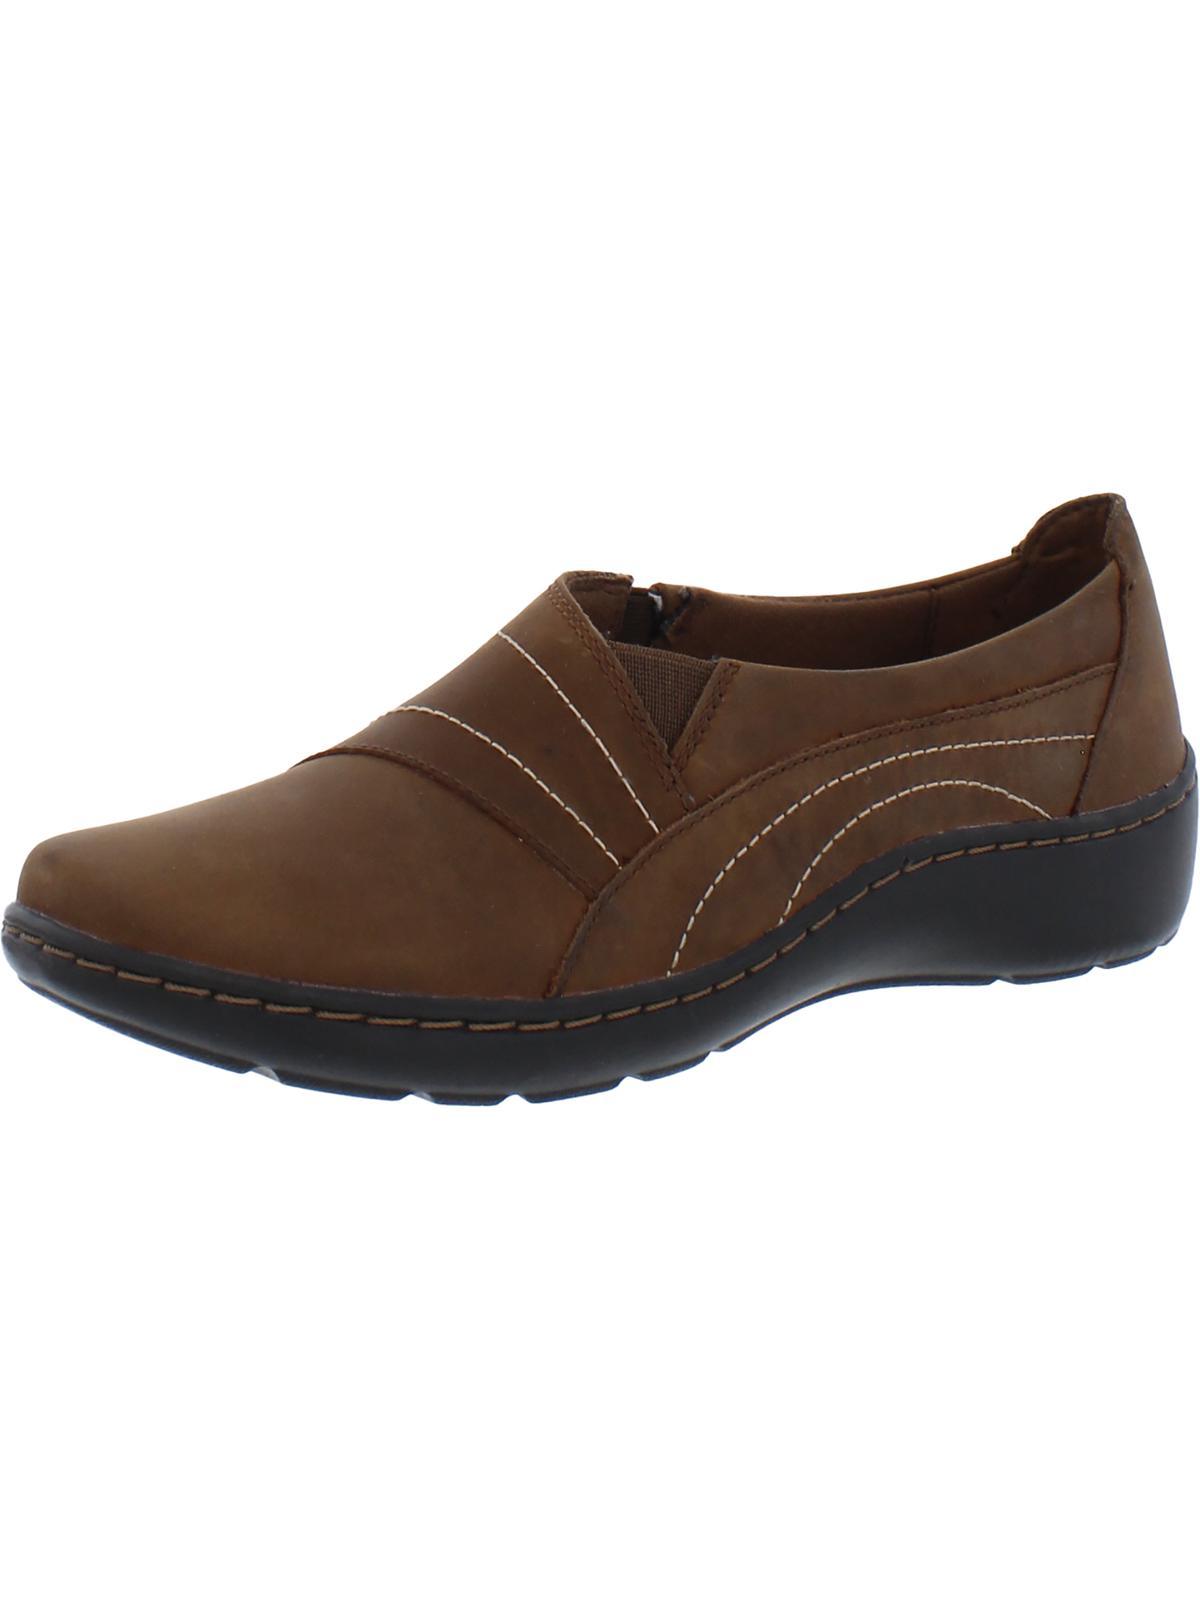 Clarks Cora Leather Comfort Insole Slip-on Shoes in Brown | Lyst